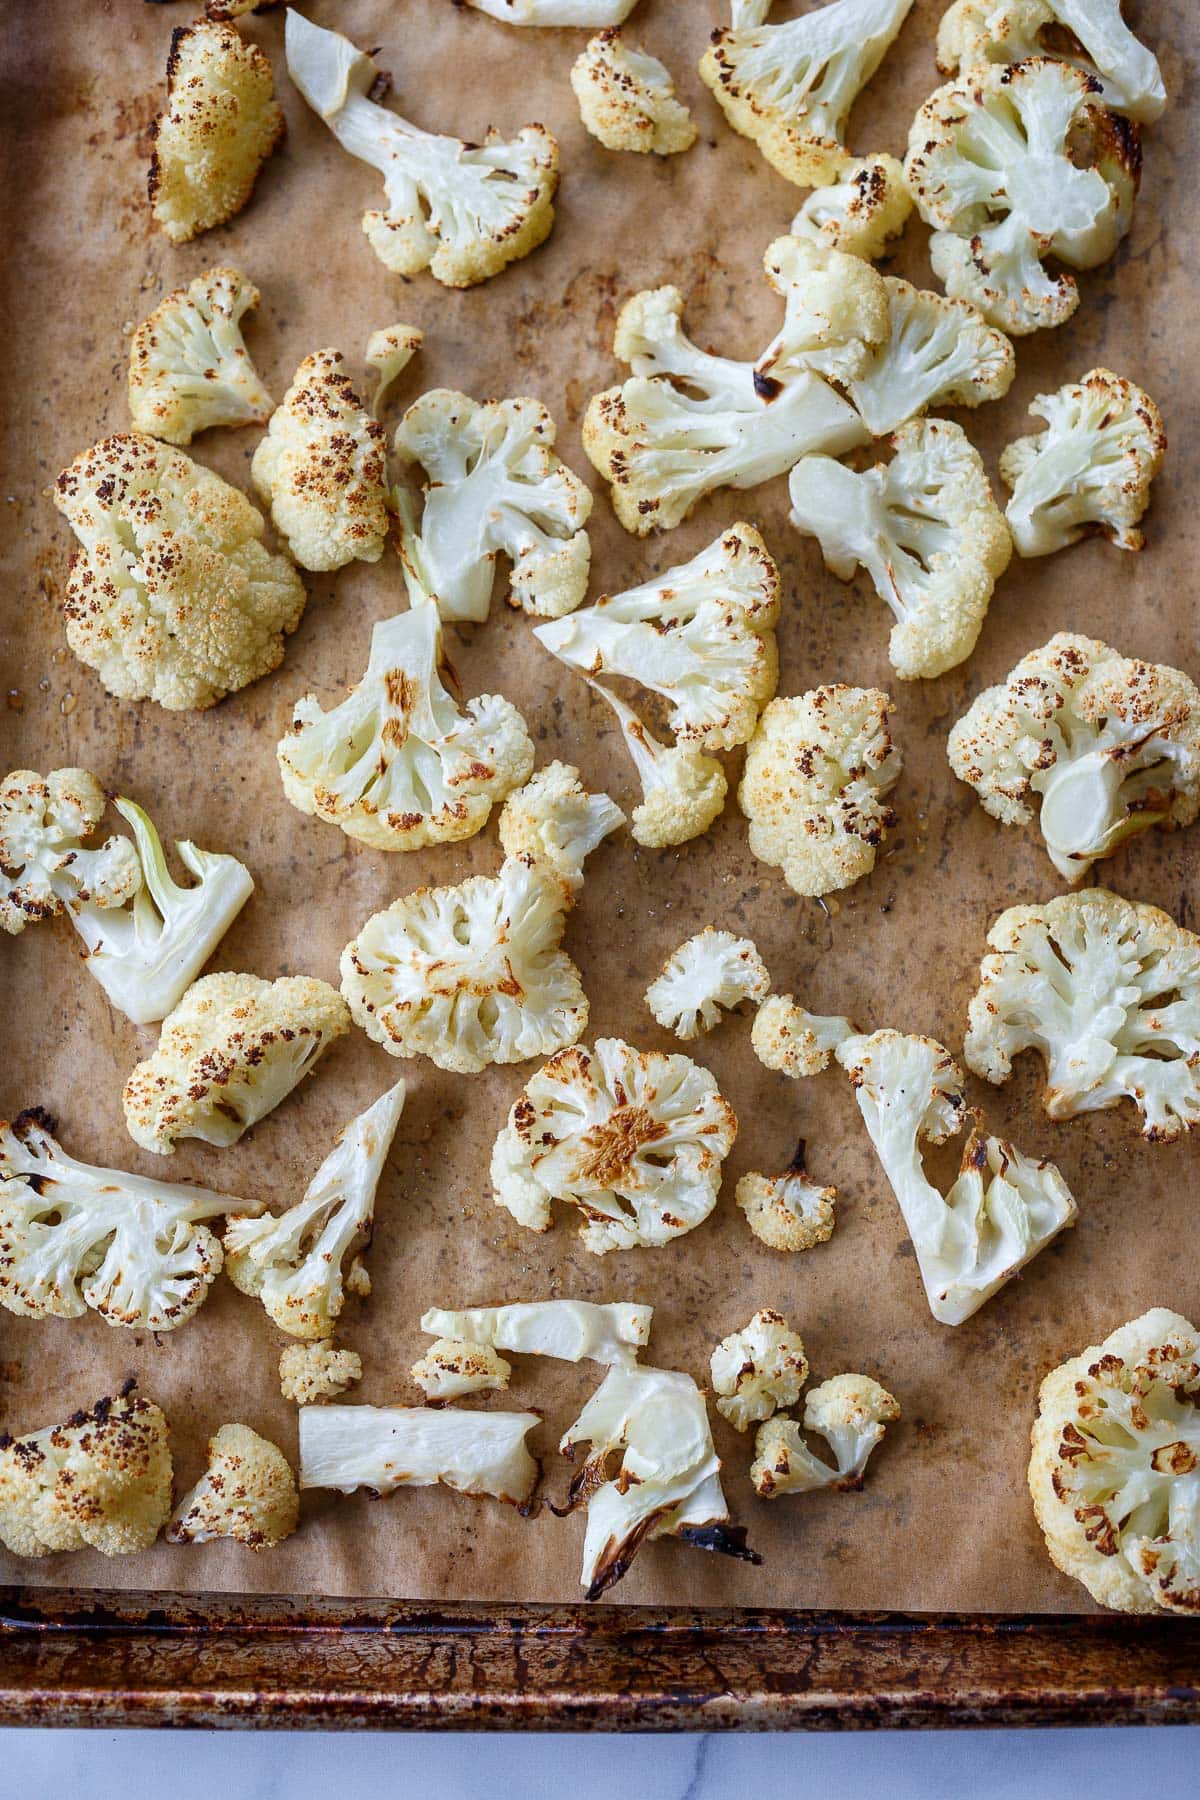 roasted cauliflower spread out on parchment-lined baking sheet, perfectly browned.